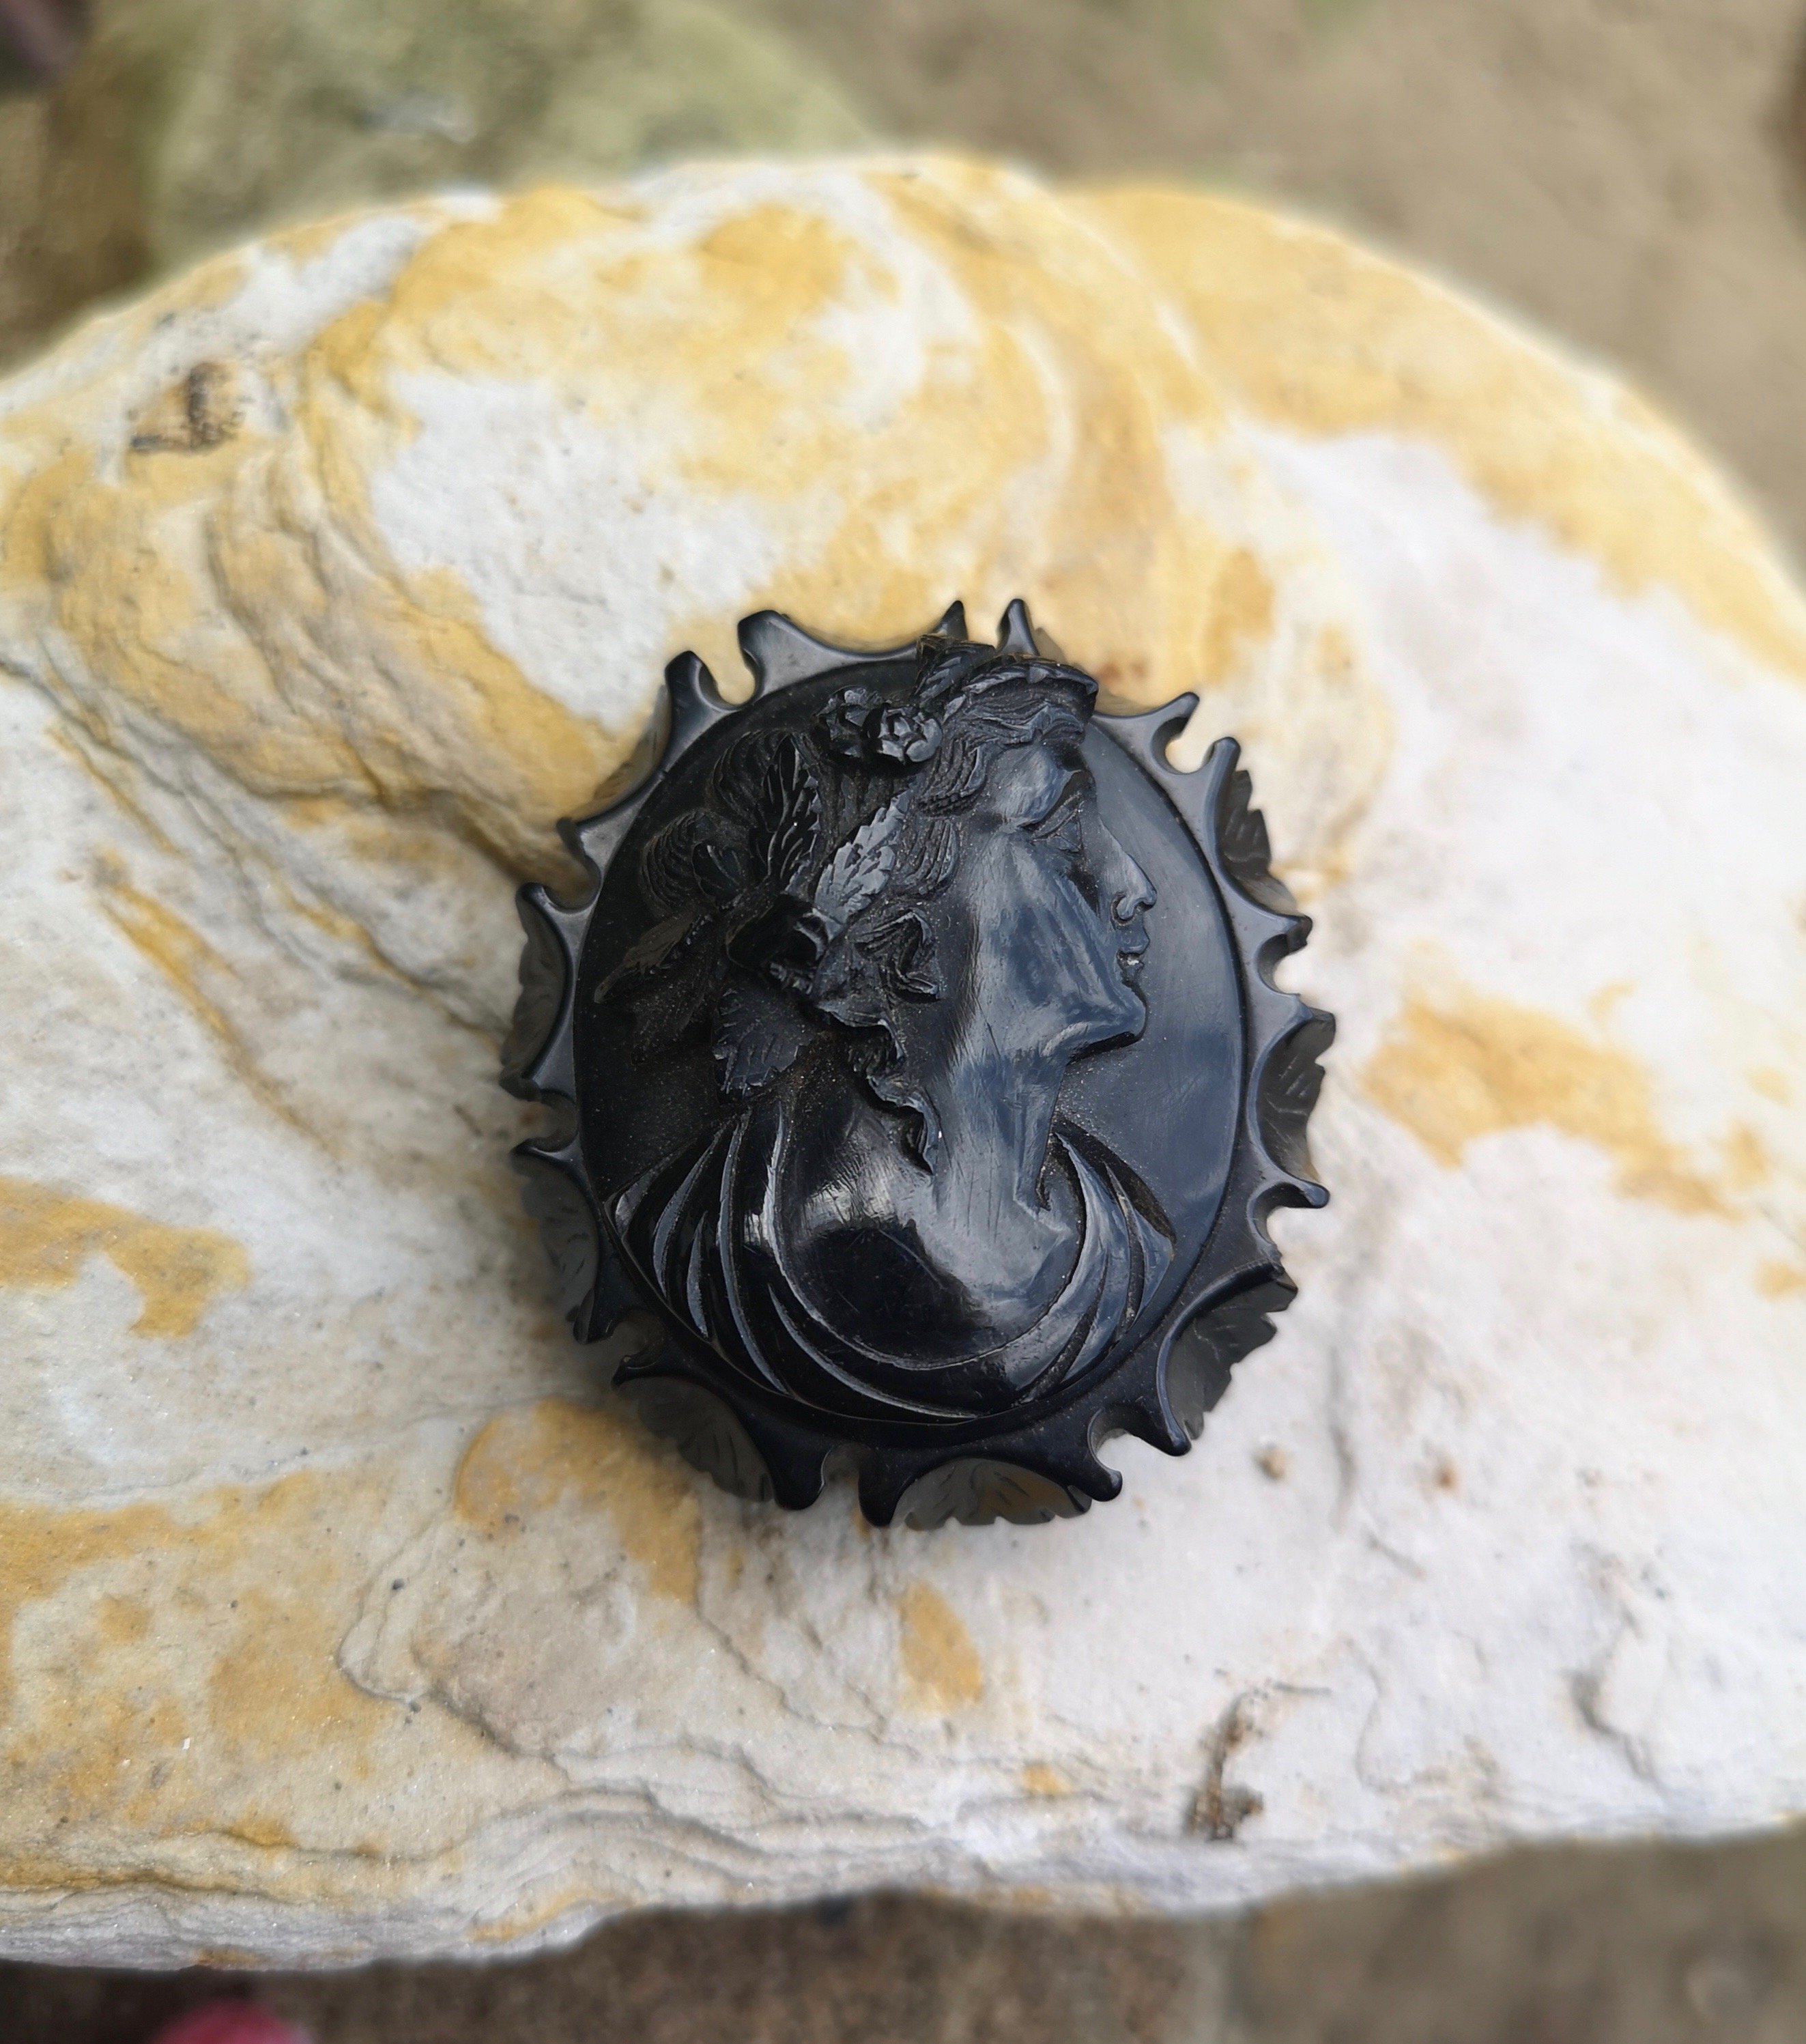 Antique Whitby Jet brooch “lady with leaves in her hair”